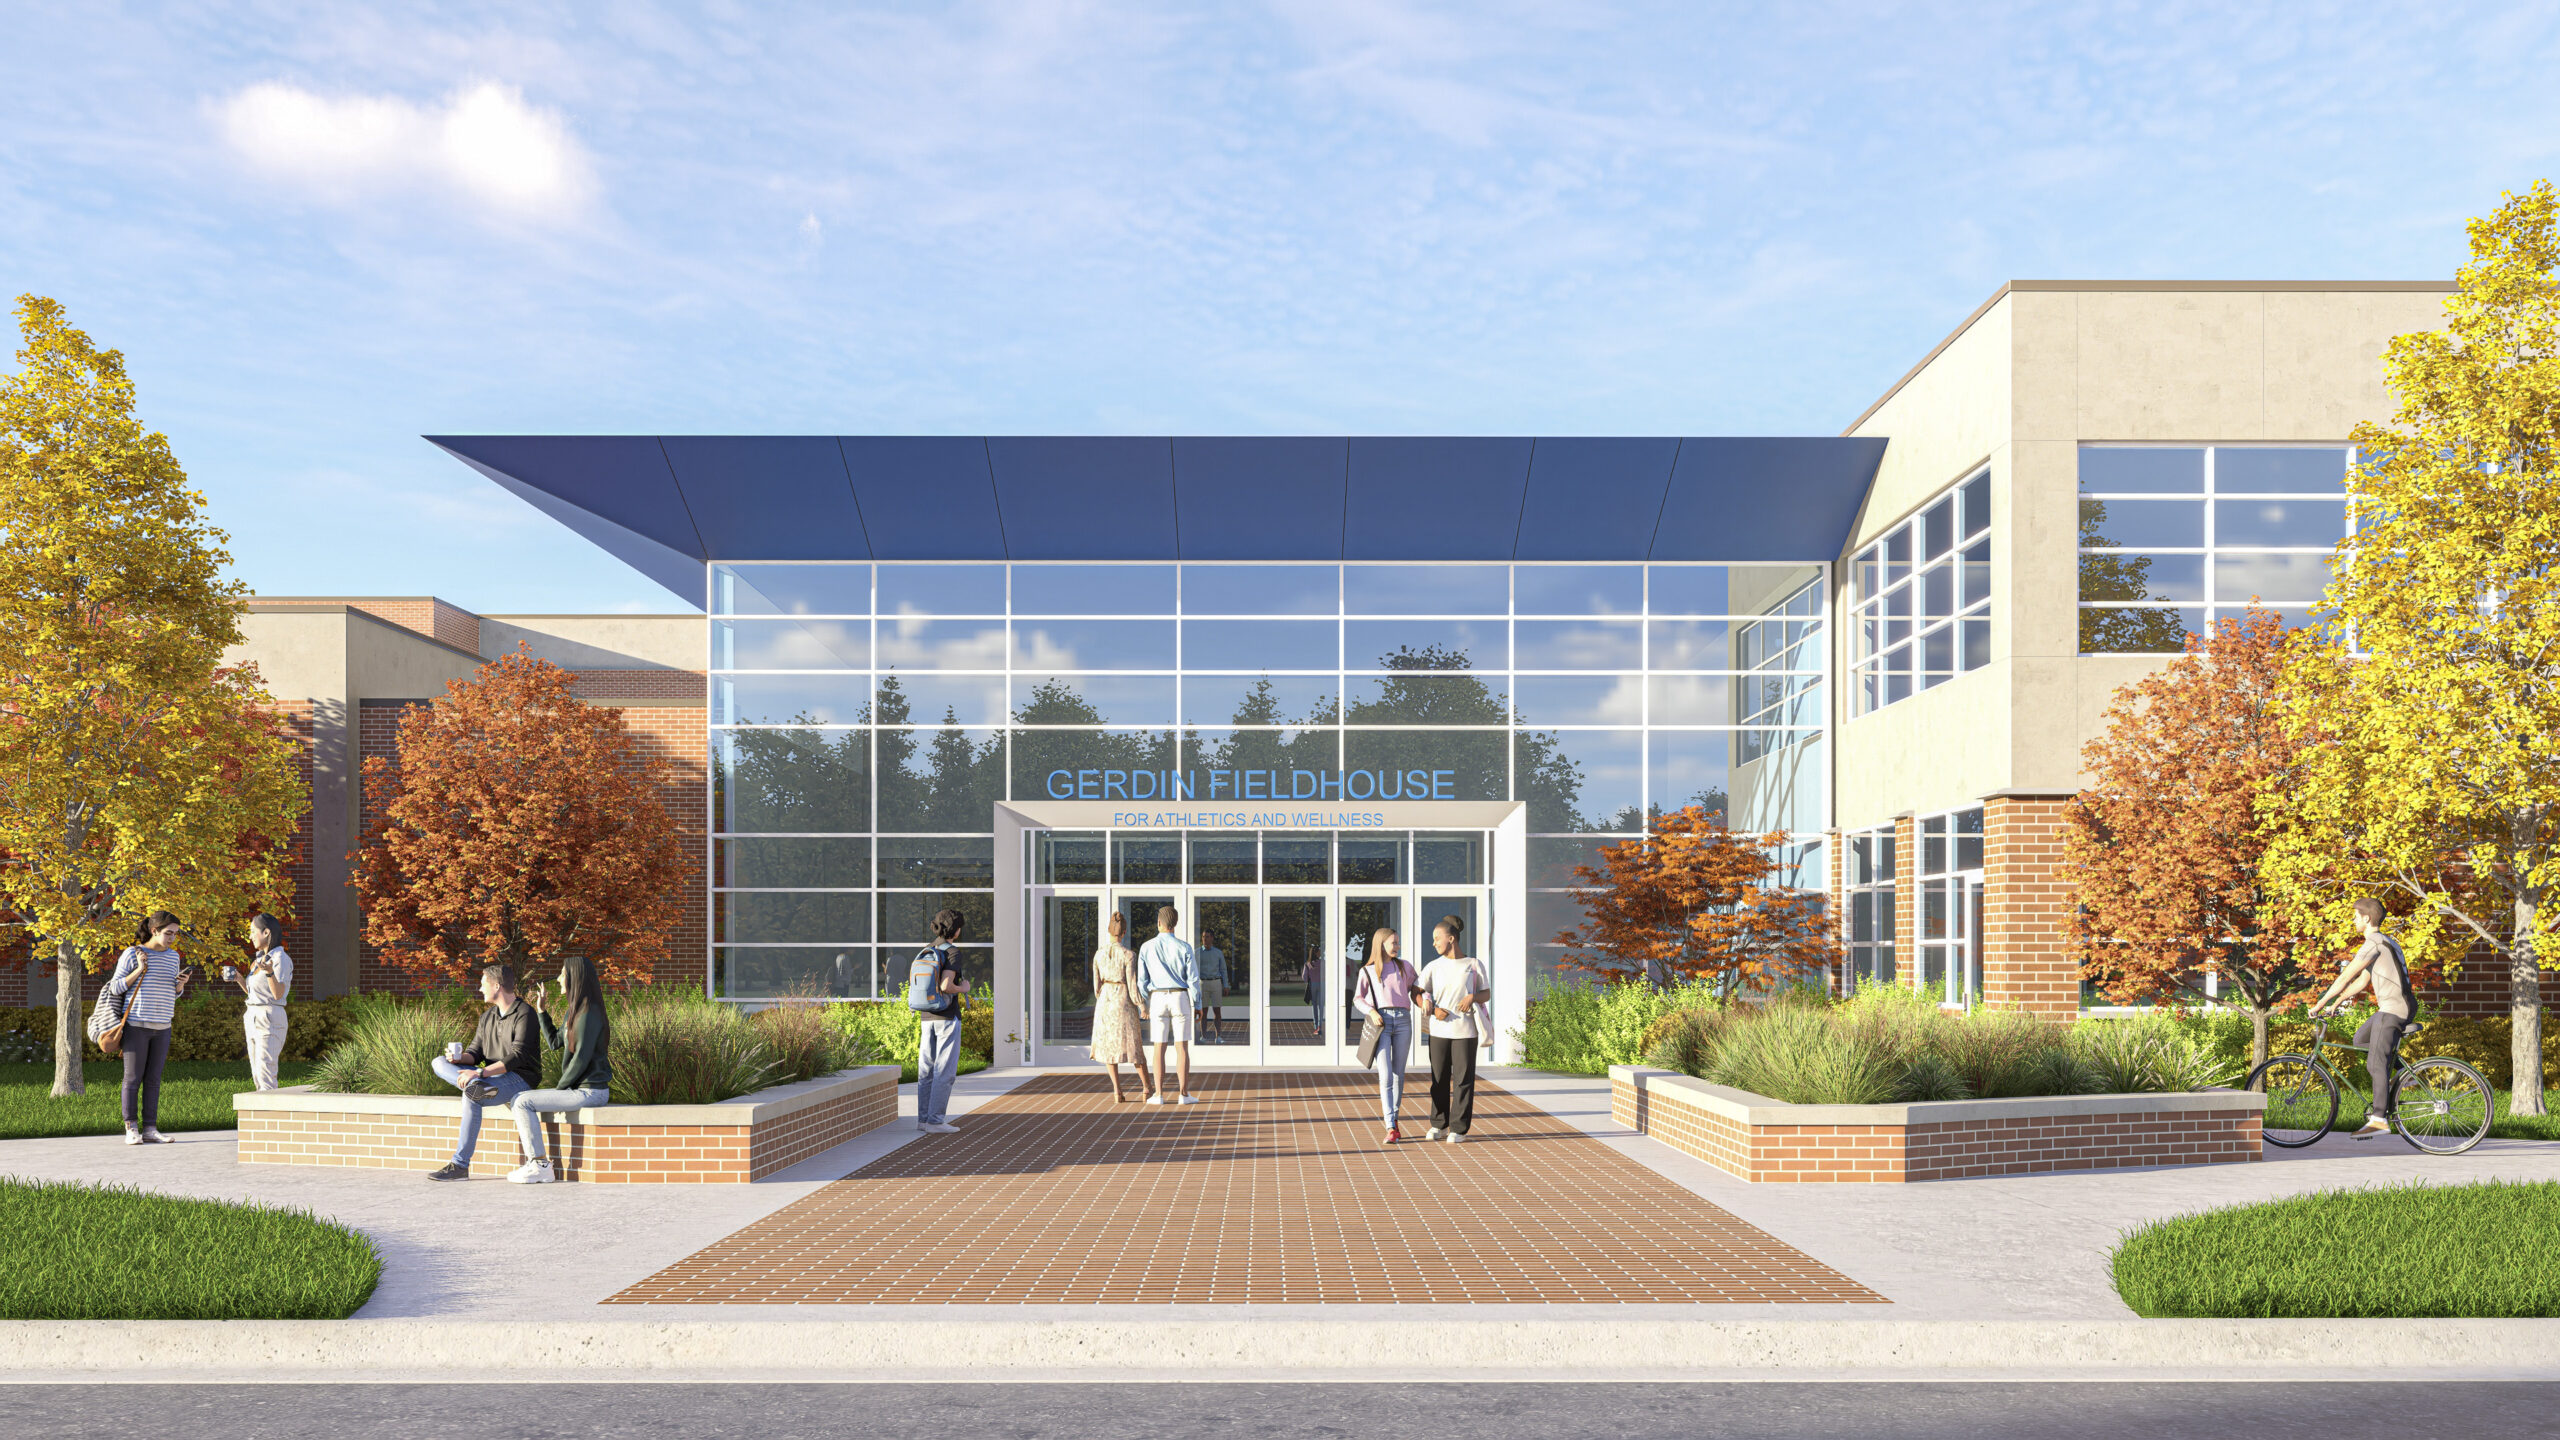 An artists rendering of the entrance to Luther's proposed new Gerdin Fieldhouse.